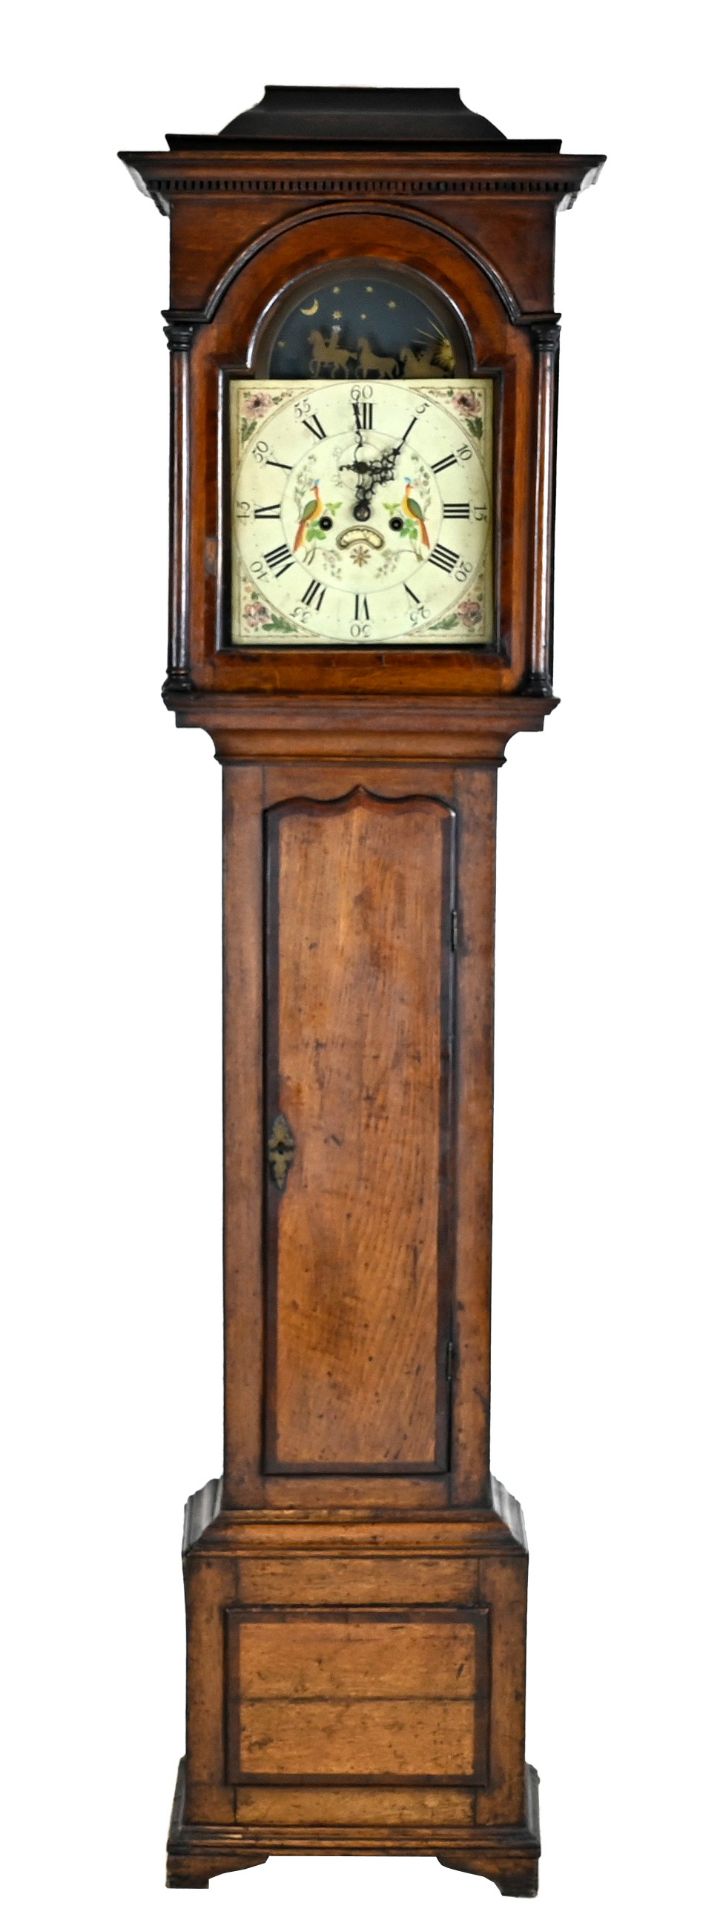 Grandfather clock England, oak, early 19th century, figures on horseback (later), seconds + date